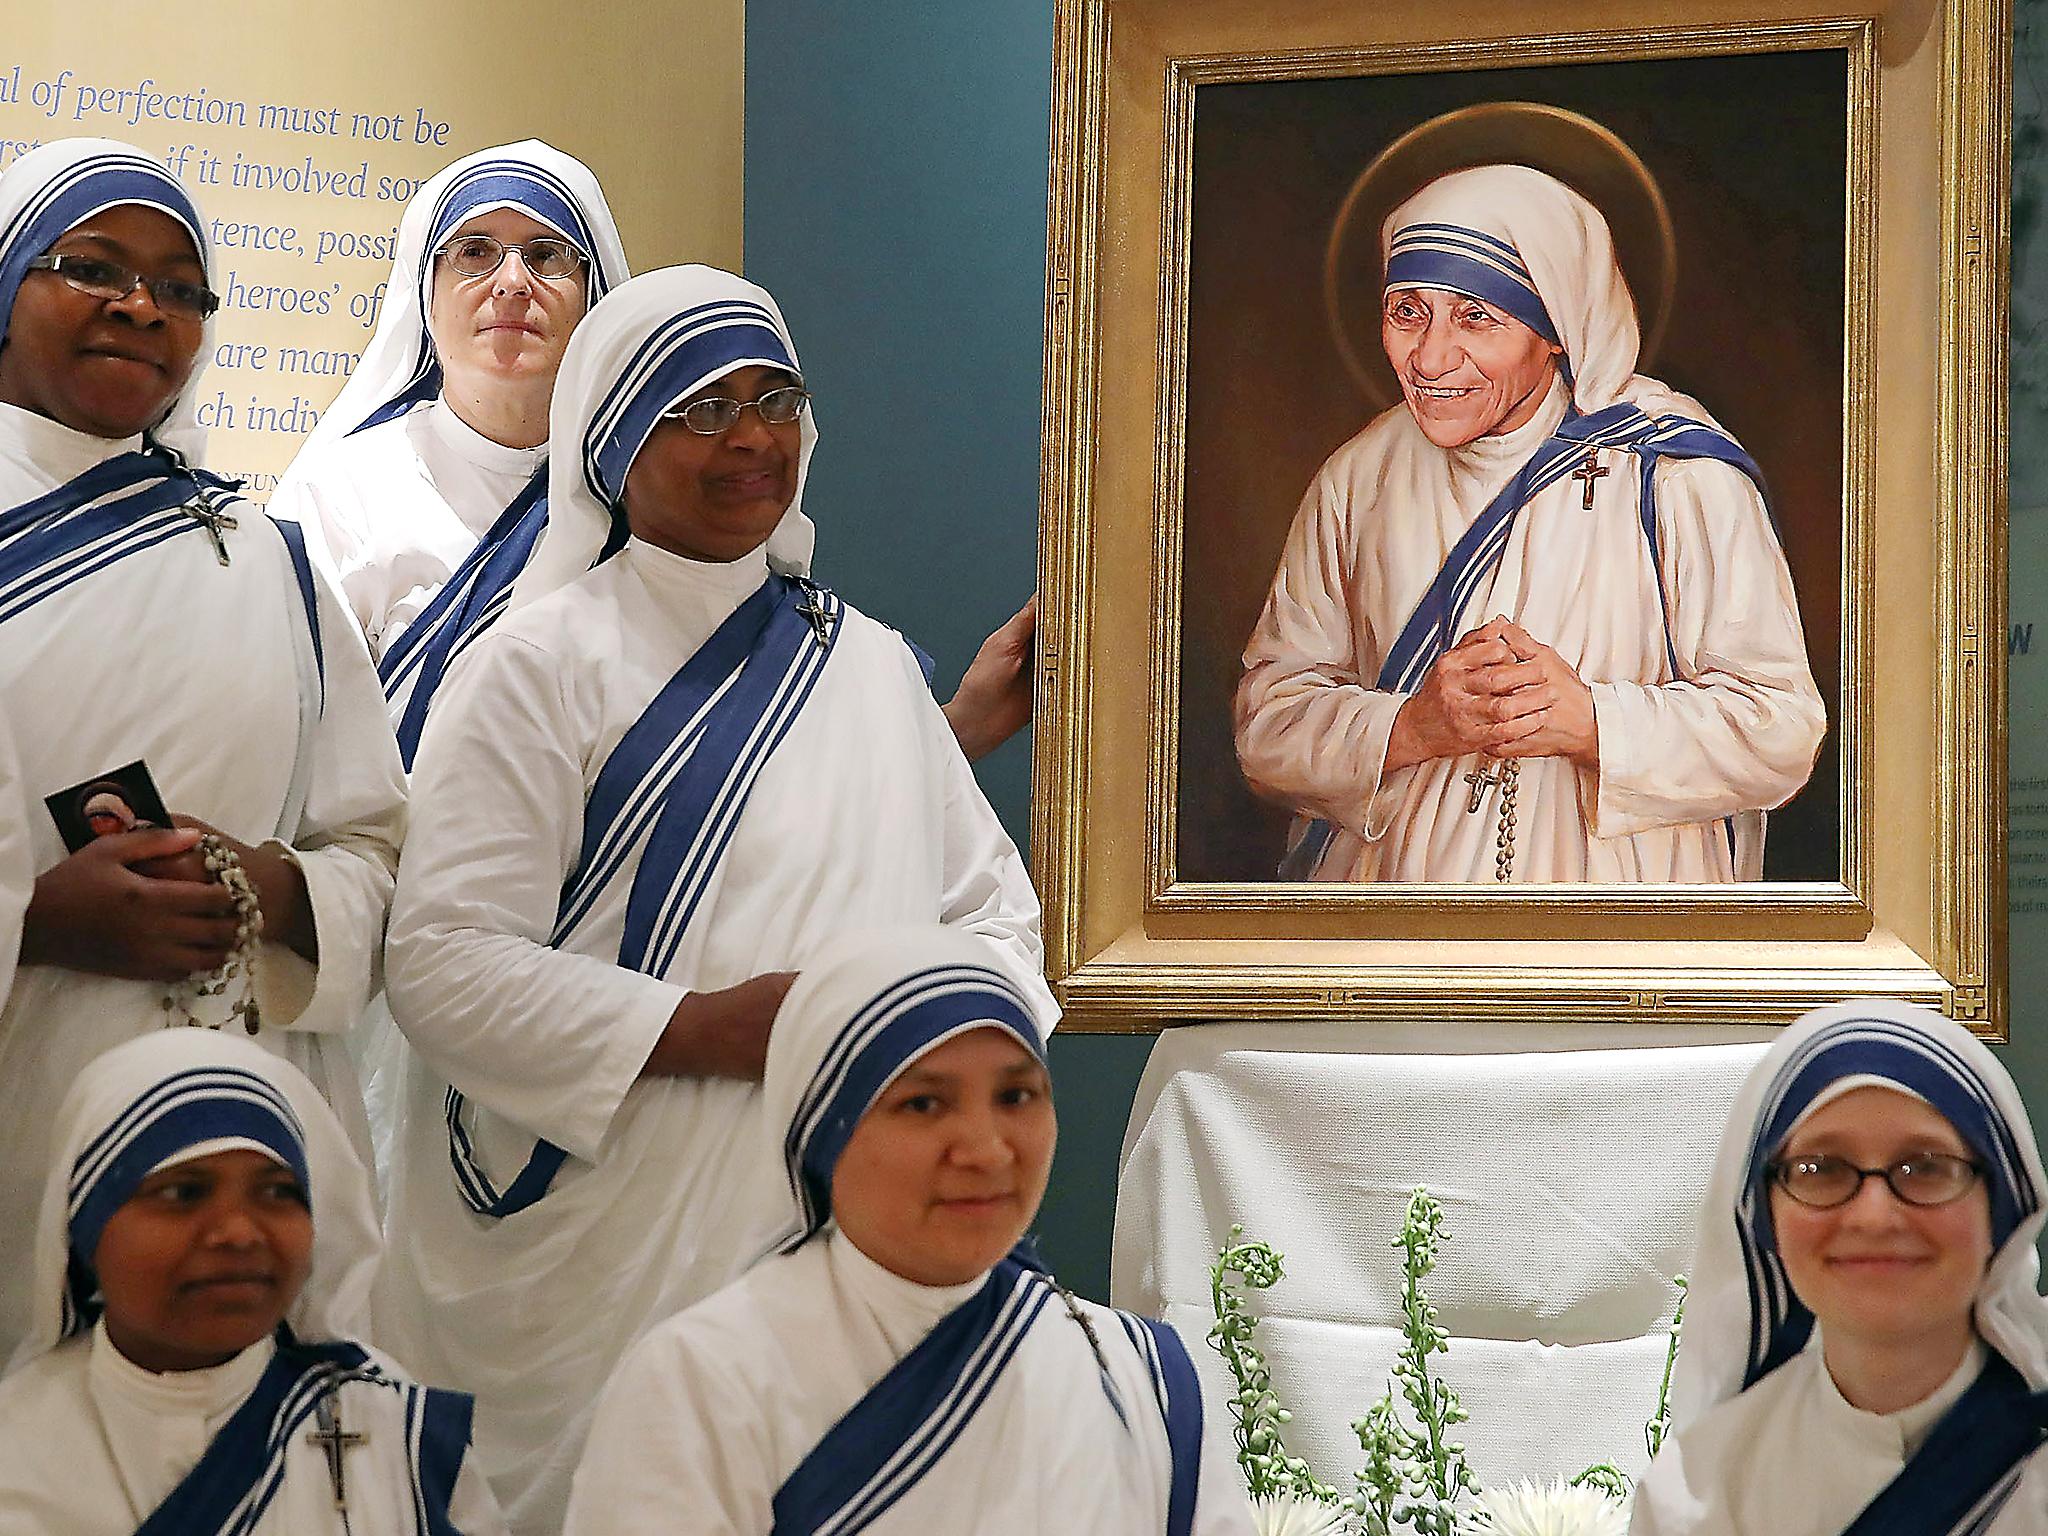 Sisters of the Missionaries of Charity, stand before the canonisation portrait of Mother Teresa at The Saint John Paul II National Shrine, Washington (Getty)